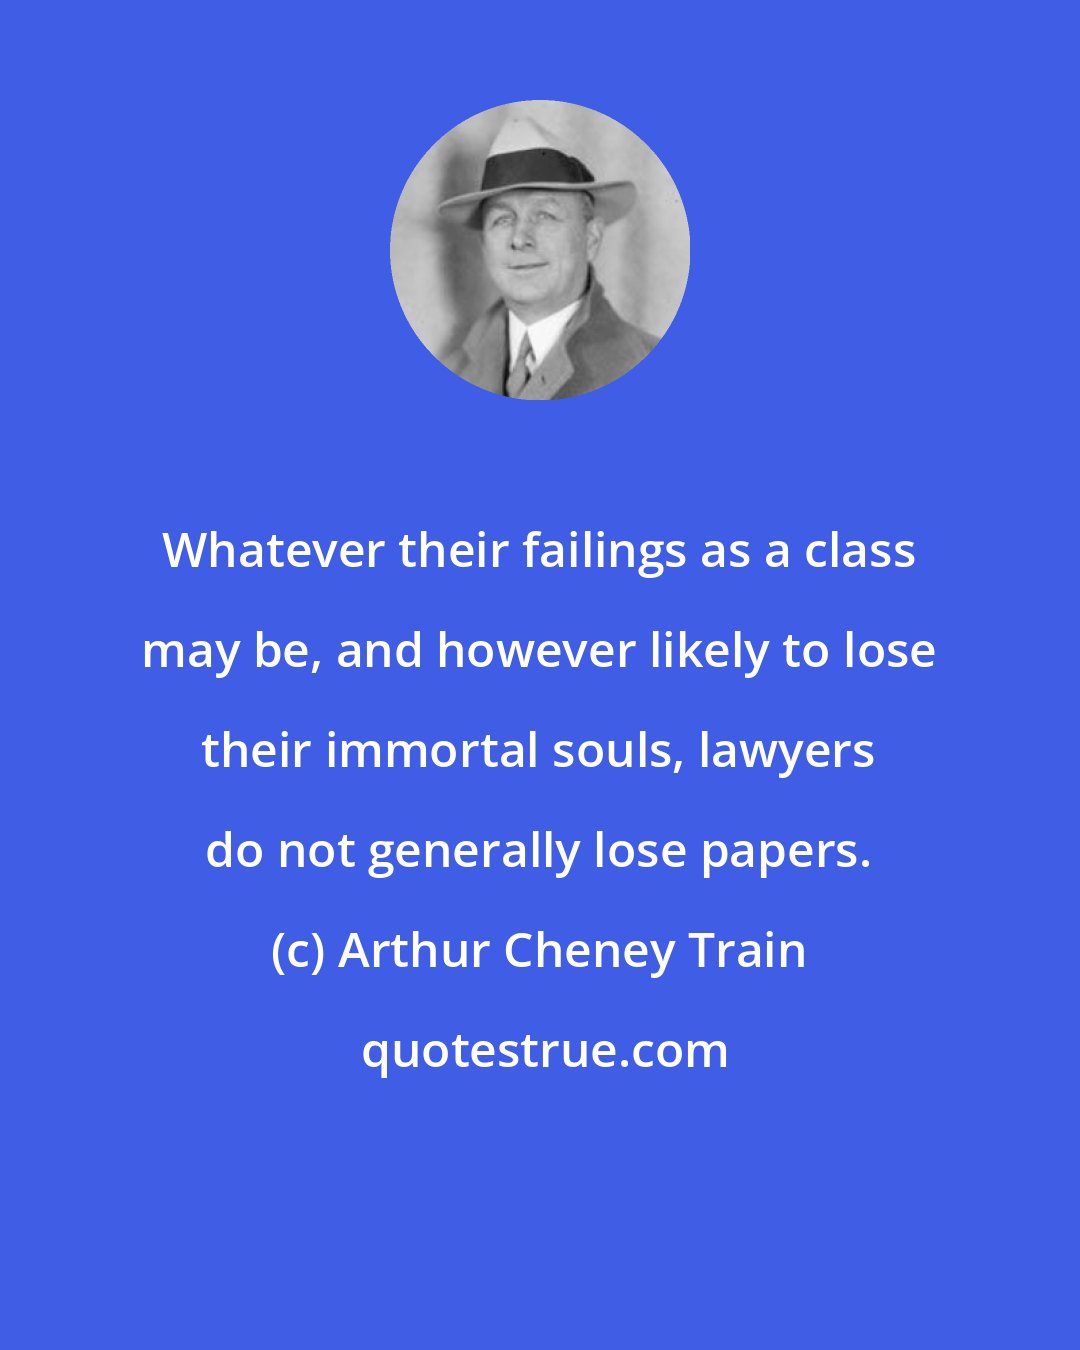 Arthur Cheney Train: Whatever their failings as a class may be, and however likely to lose their immortal souls, lawyers do not generally lose papers.